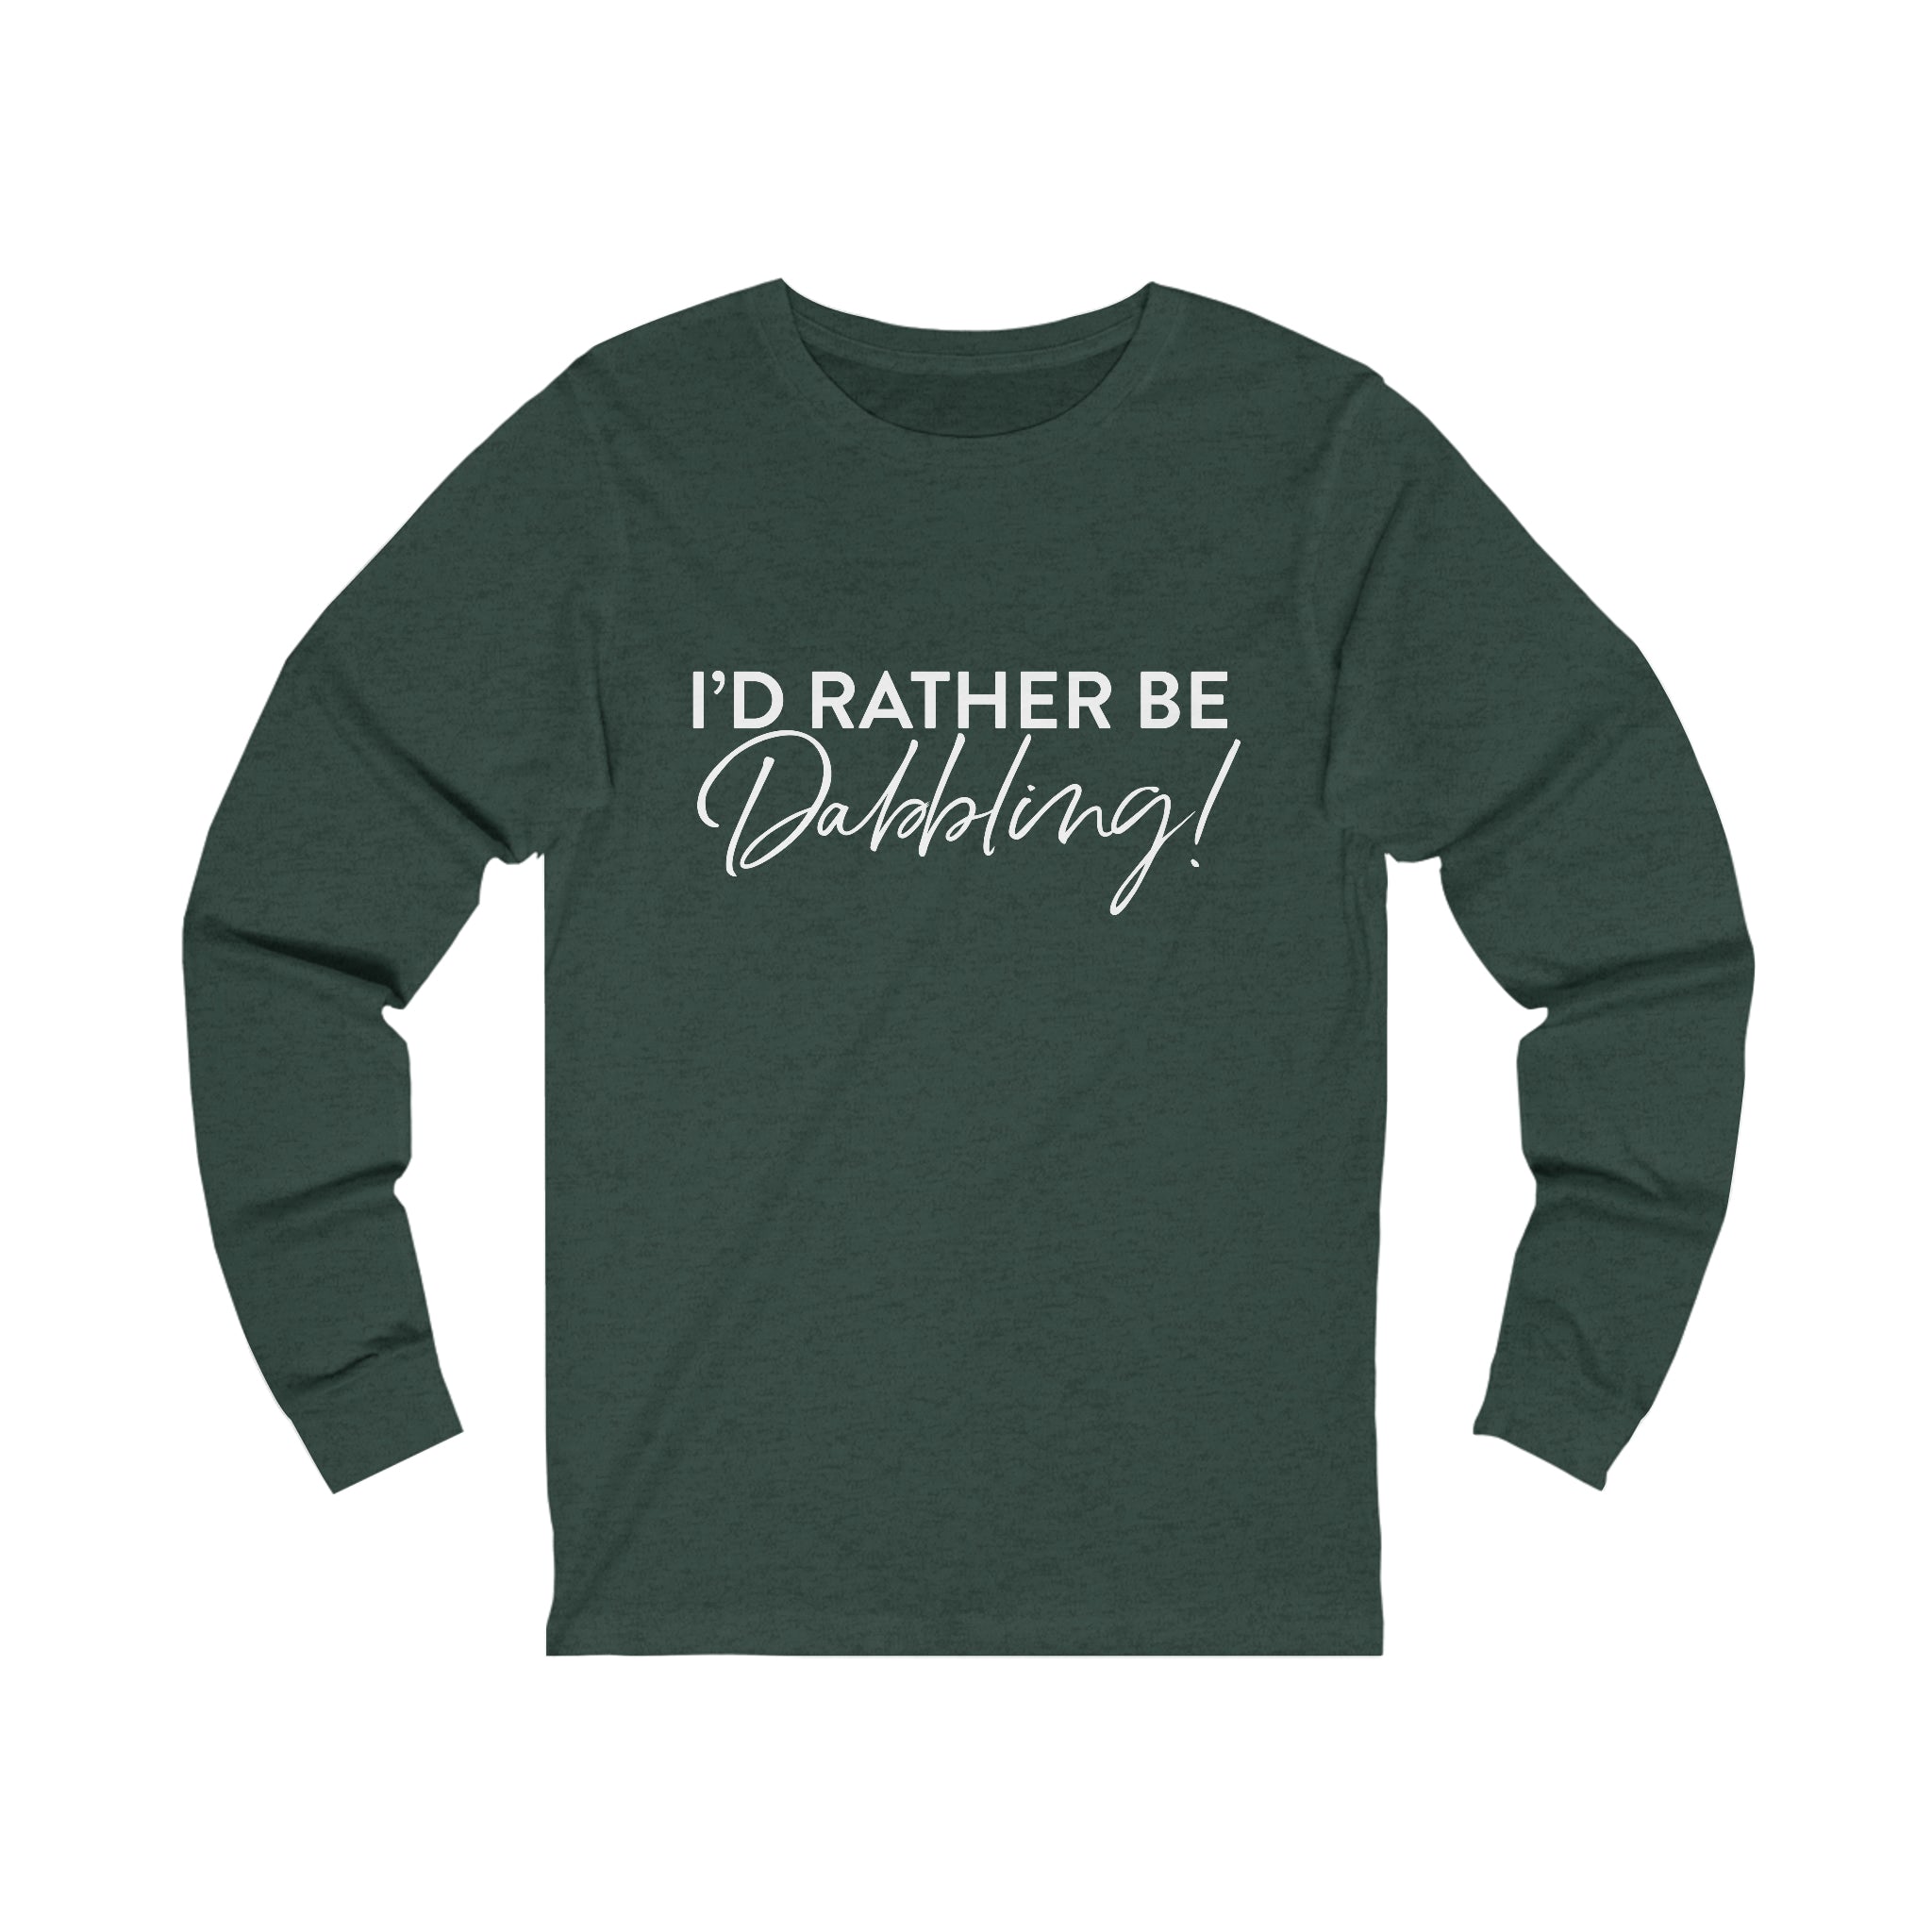 I'd Rather Be Dabbling Long Sleeve Tee without palette knife